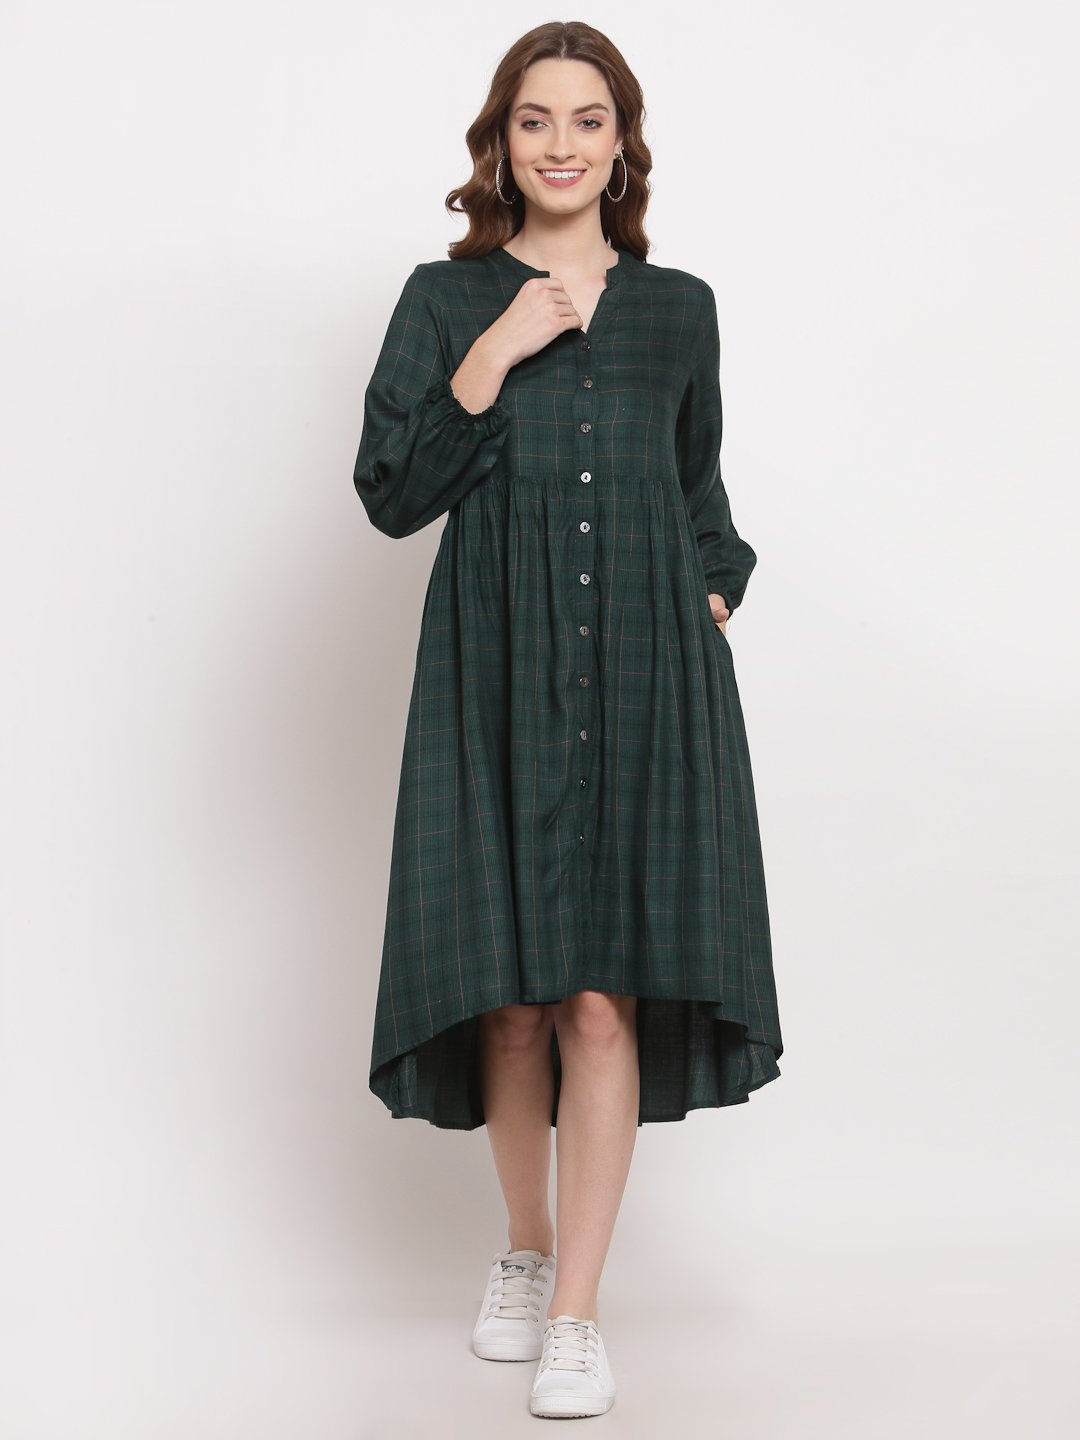 Terquois Green Checks A-Line Dress Dresses TERQUOIS   